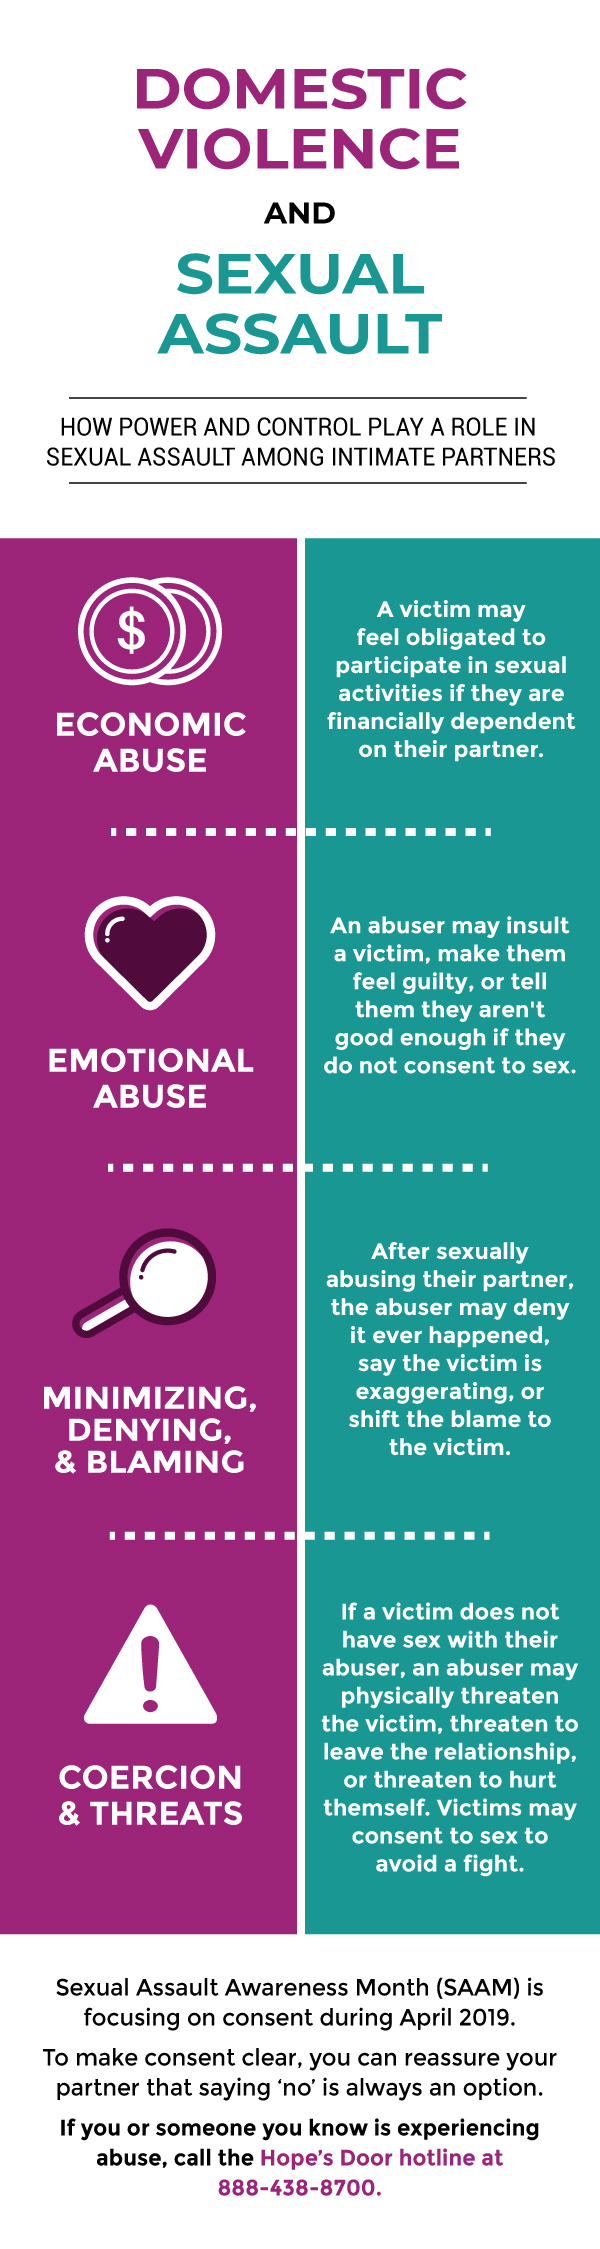 A Sexual Assault Awareness Month (#SAAM) infographic explaining sexual assault in domestic violence.